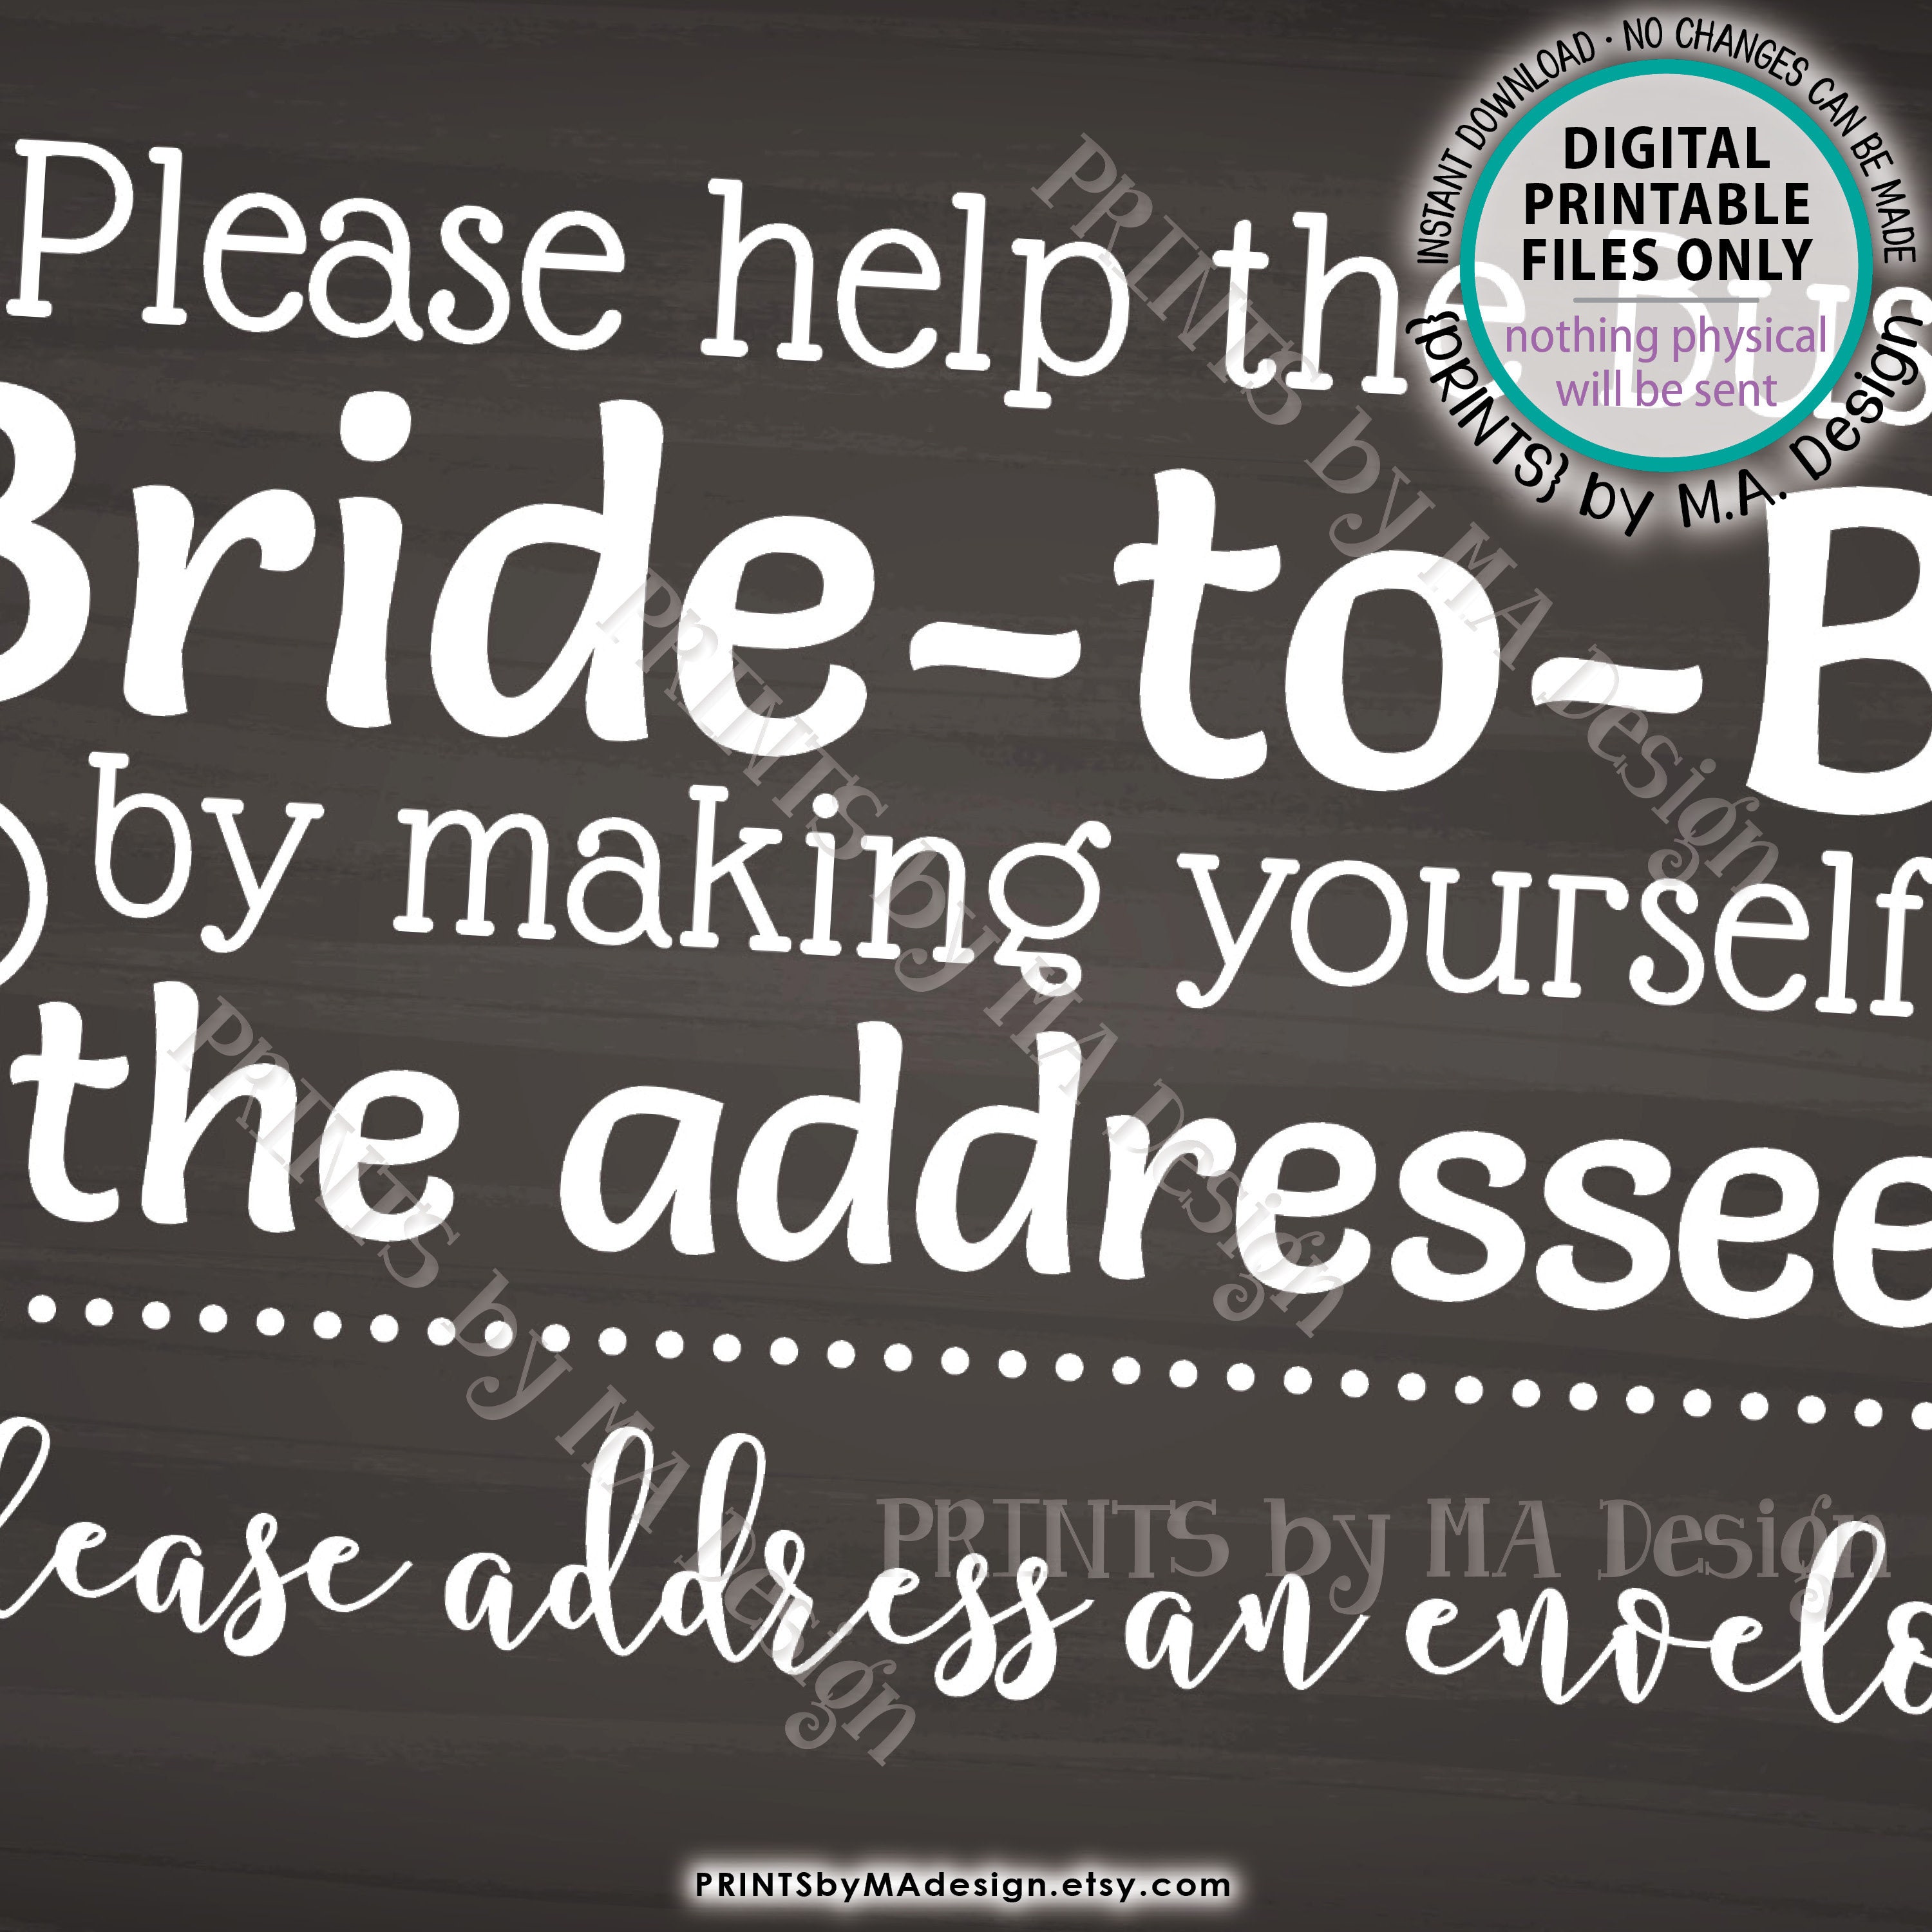 bridal-shower-address-an-envelope-sign-help-the-busy-bride-to-be-by